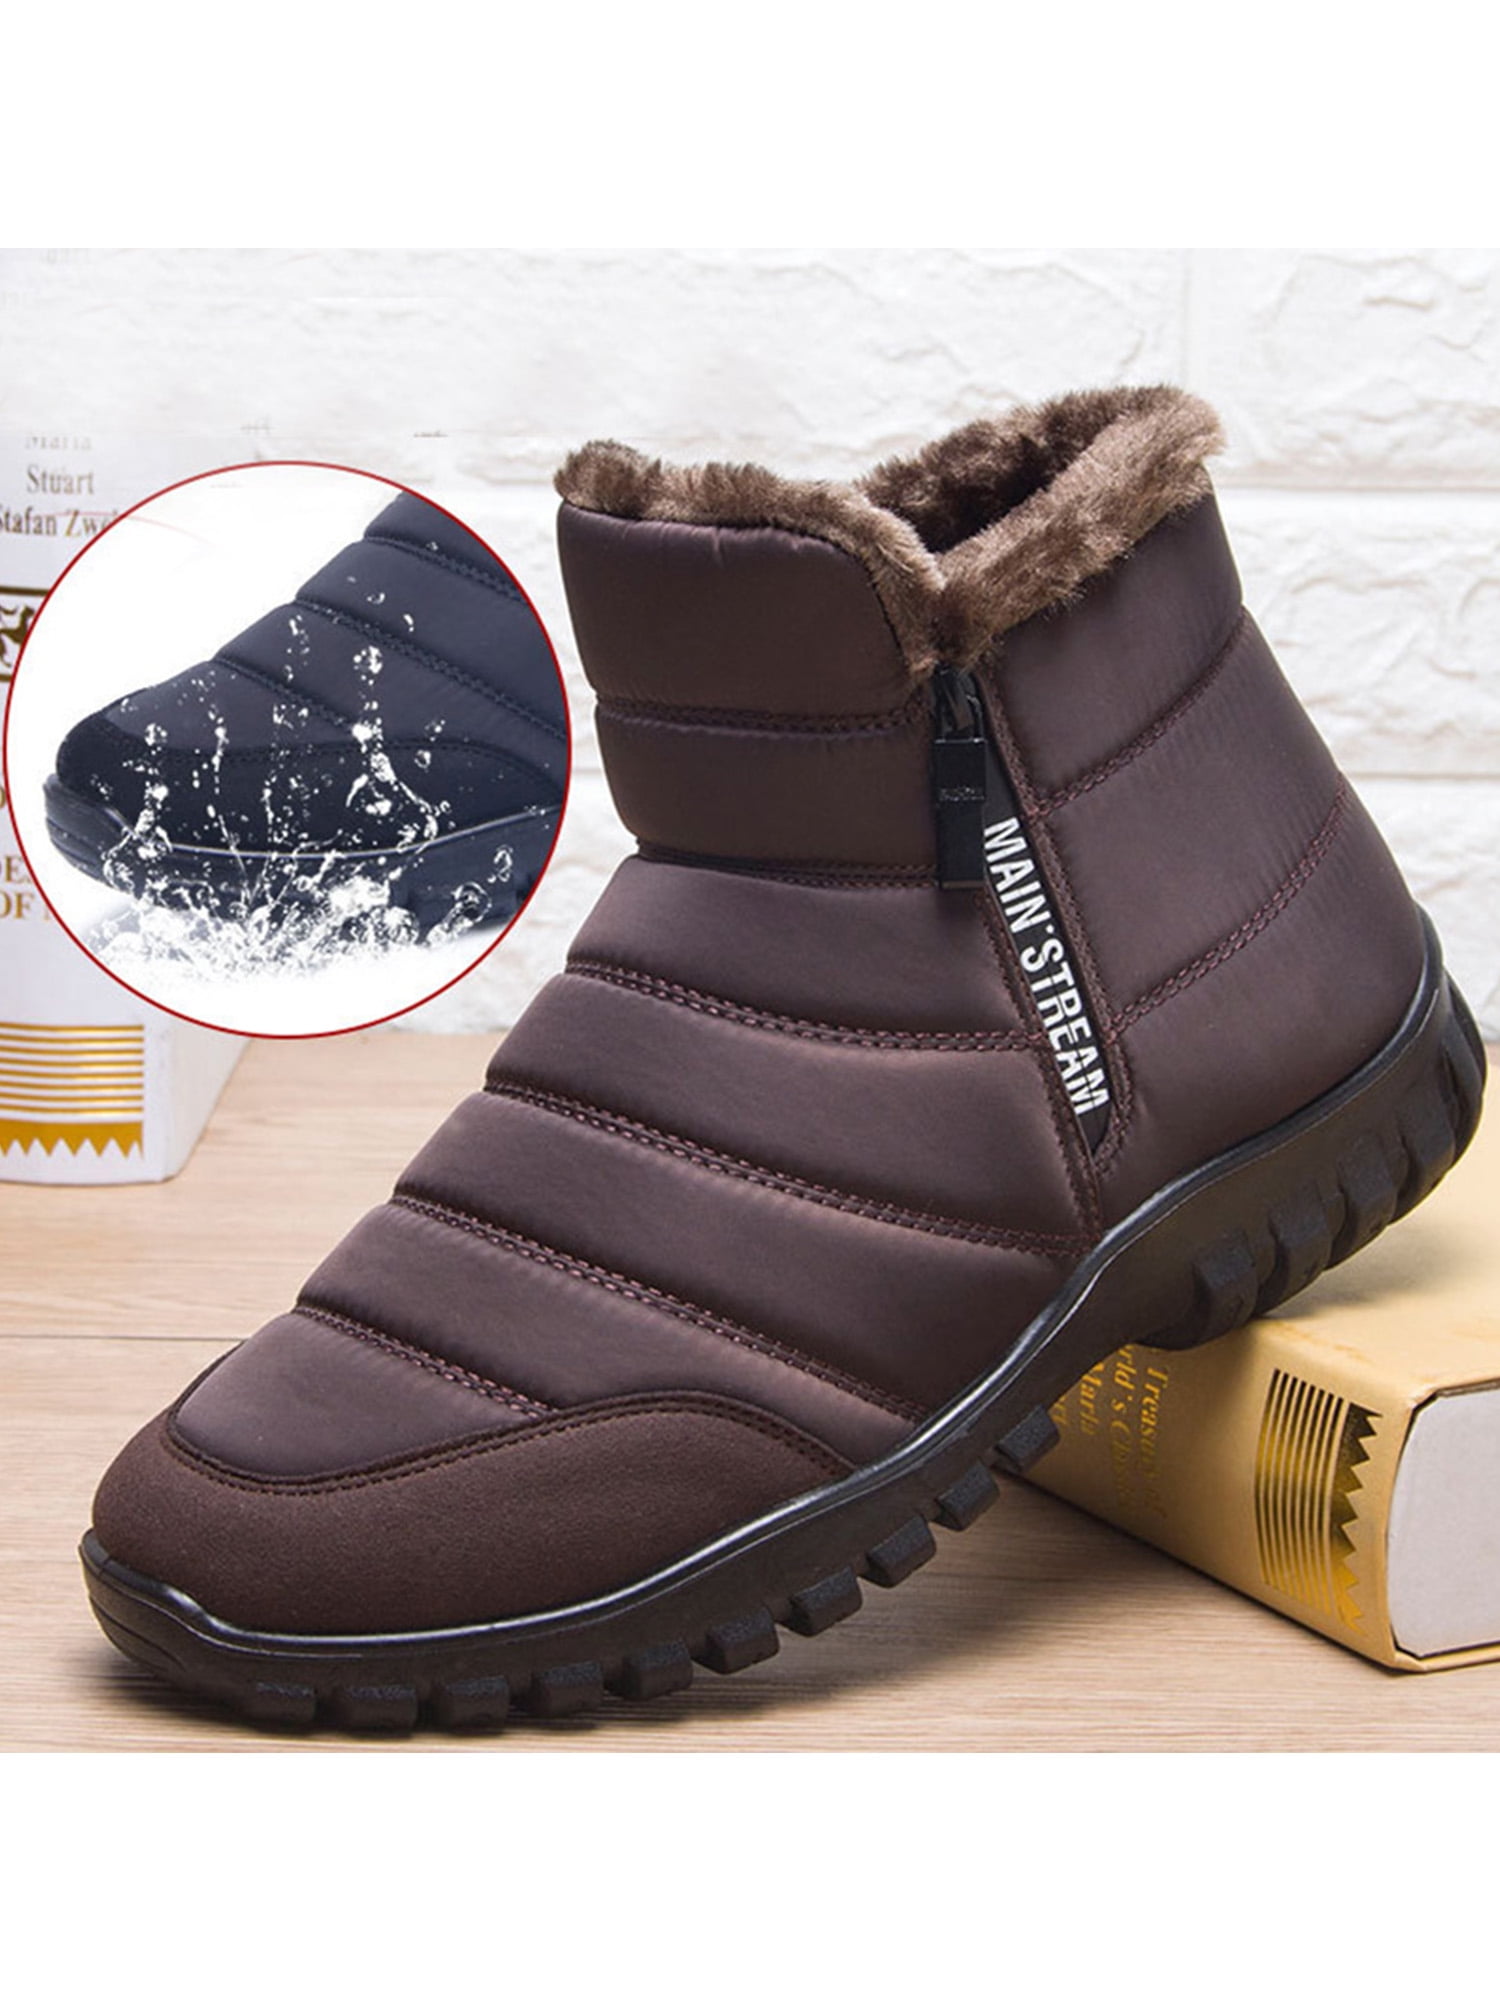 Men Winter High Top Ankle Boots Shoes Walking Sports Snow Ski Non-slip Casual D